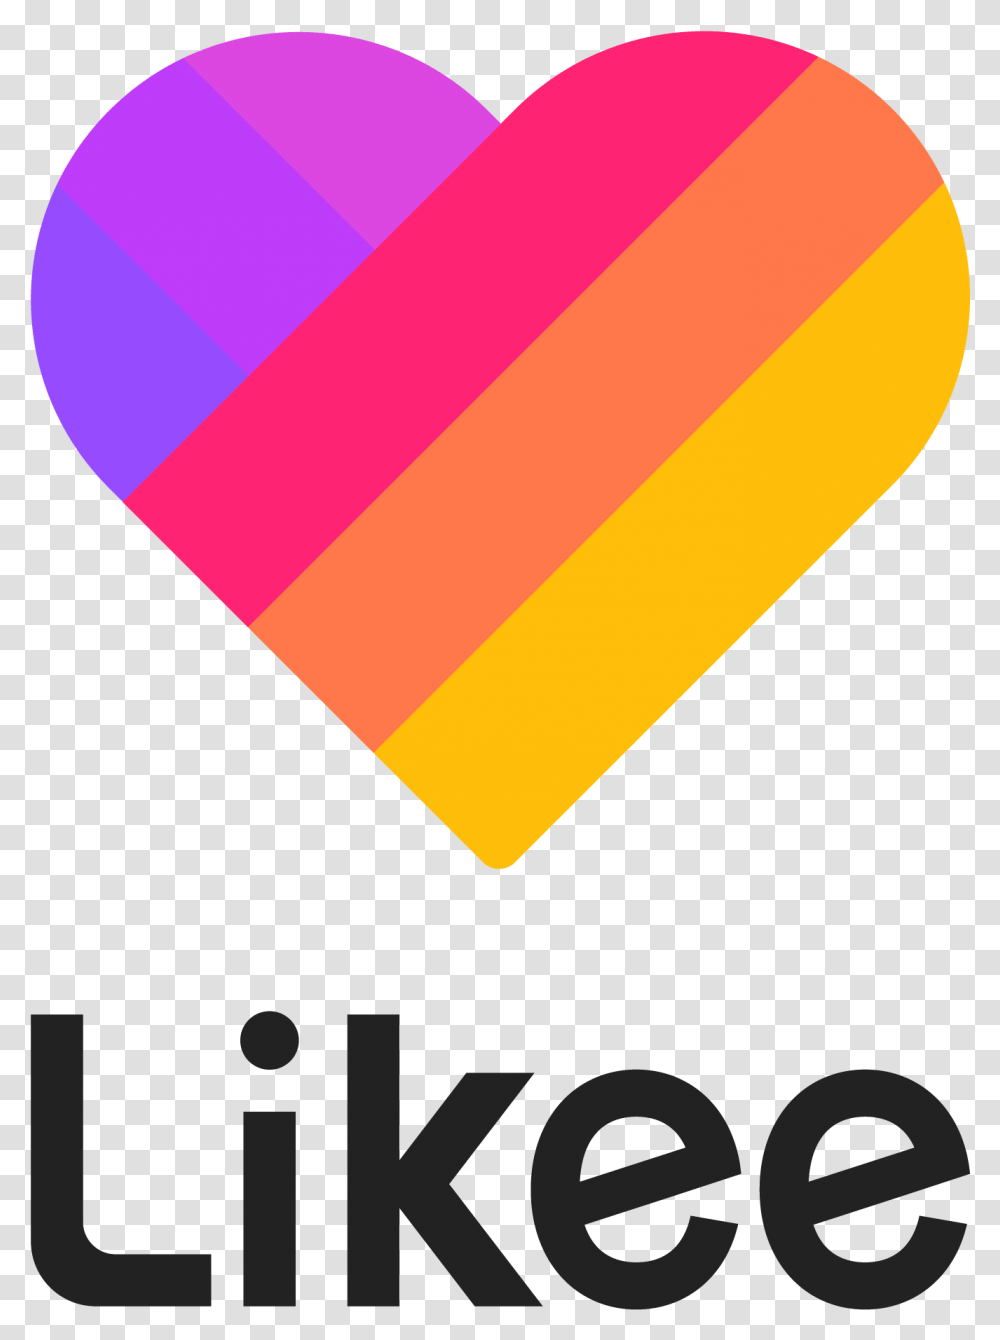 2019 Breakout App' Likee Climbs To 4th Most Downloaded Likee Logo Hd, Plectrum, Rubber Eraser, Clothing, Apparel Transparent Png